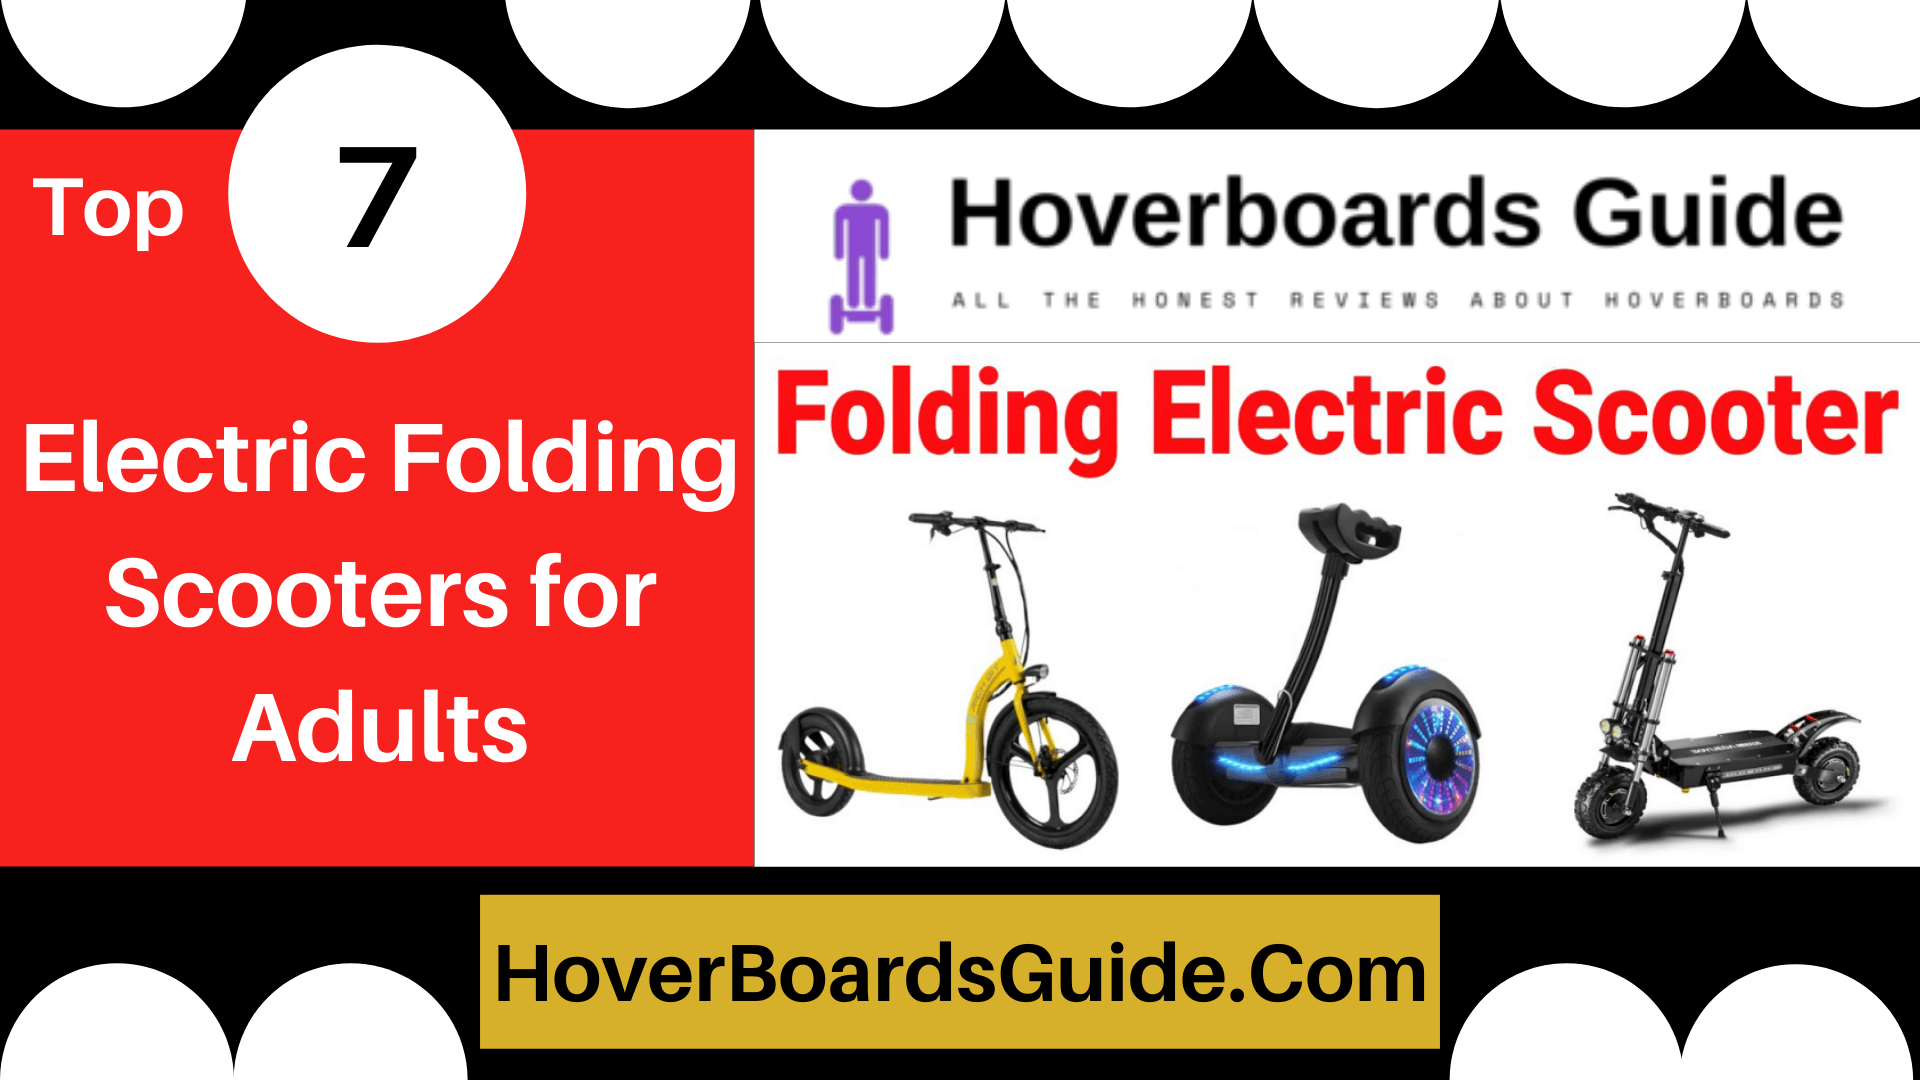 Top 7 Electric Folding Scooters for Adults